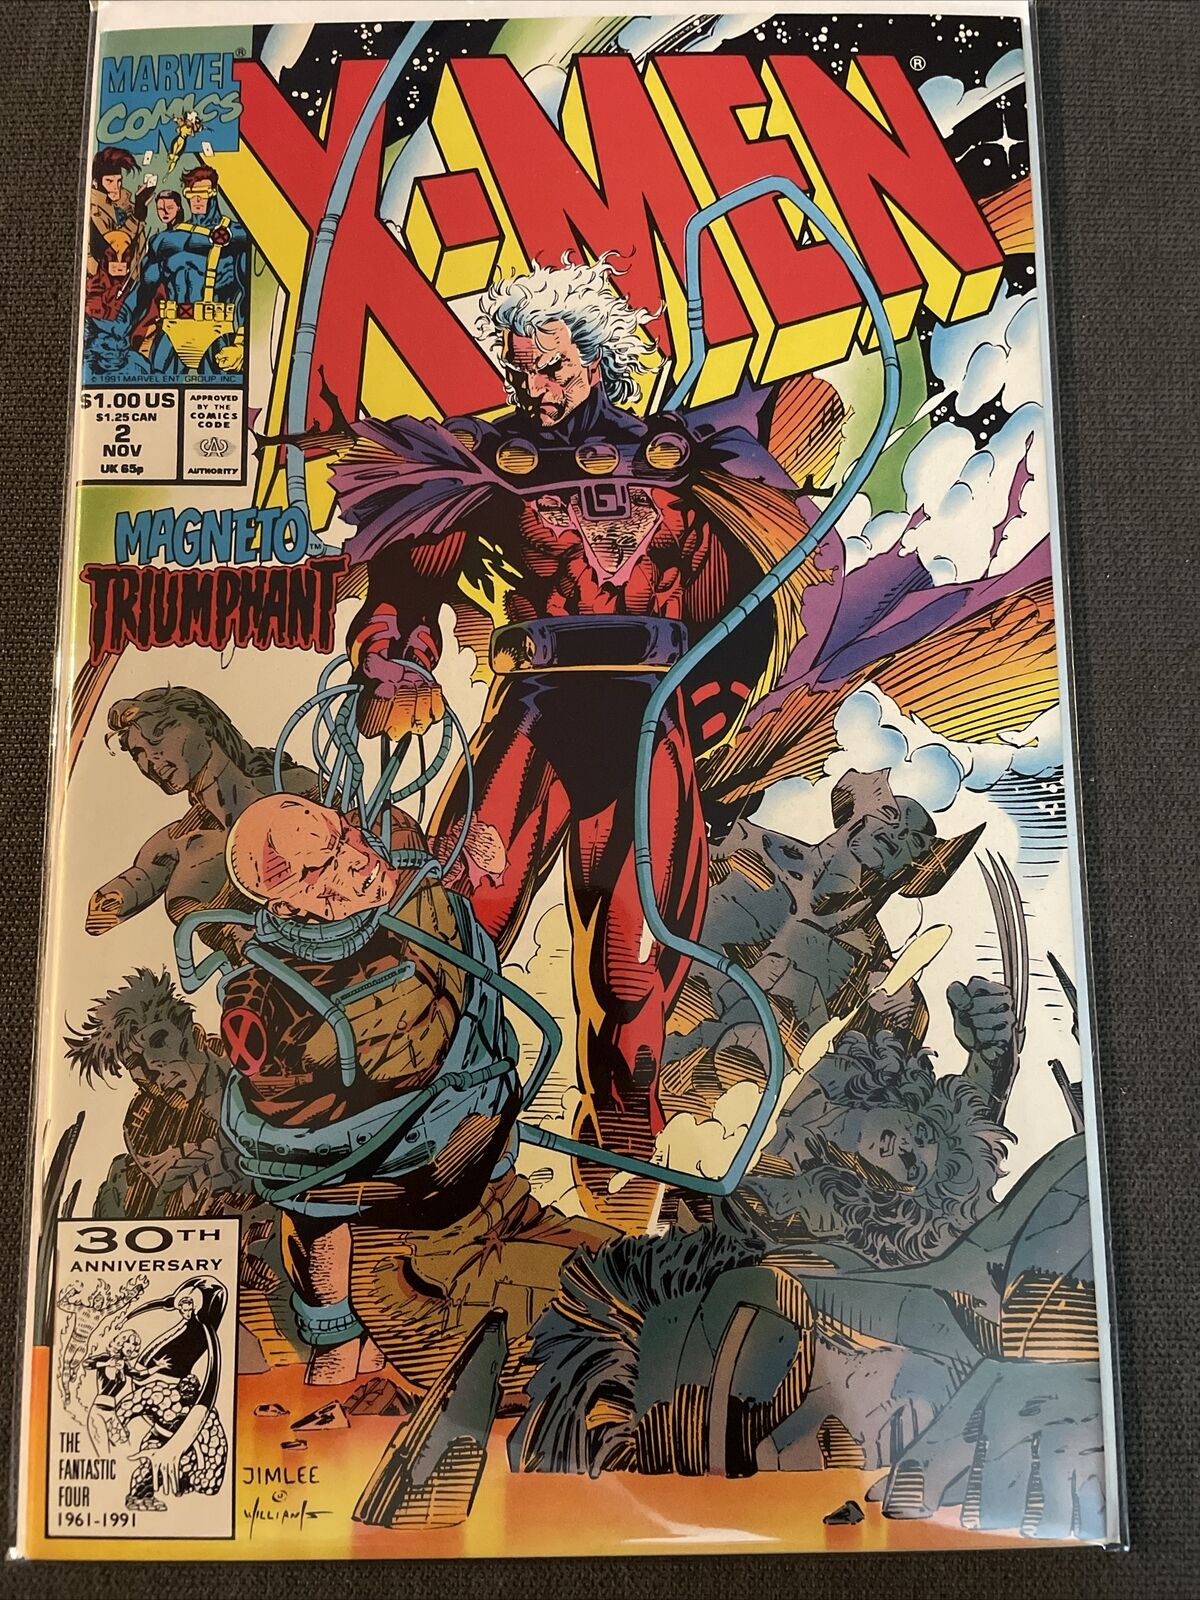 Marvel - X-MEN #2 (Great Condition) bagged and boarded